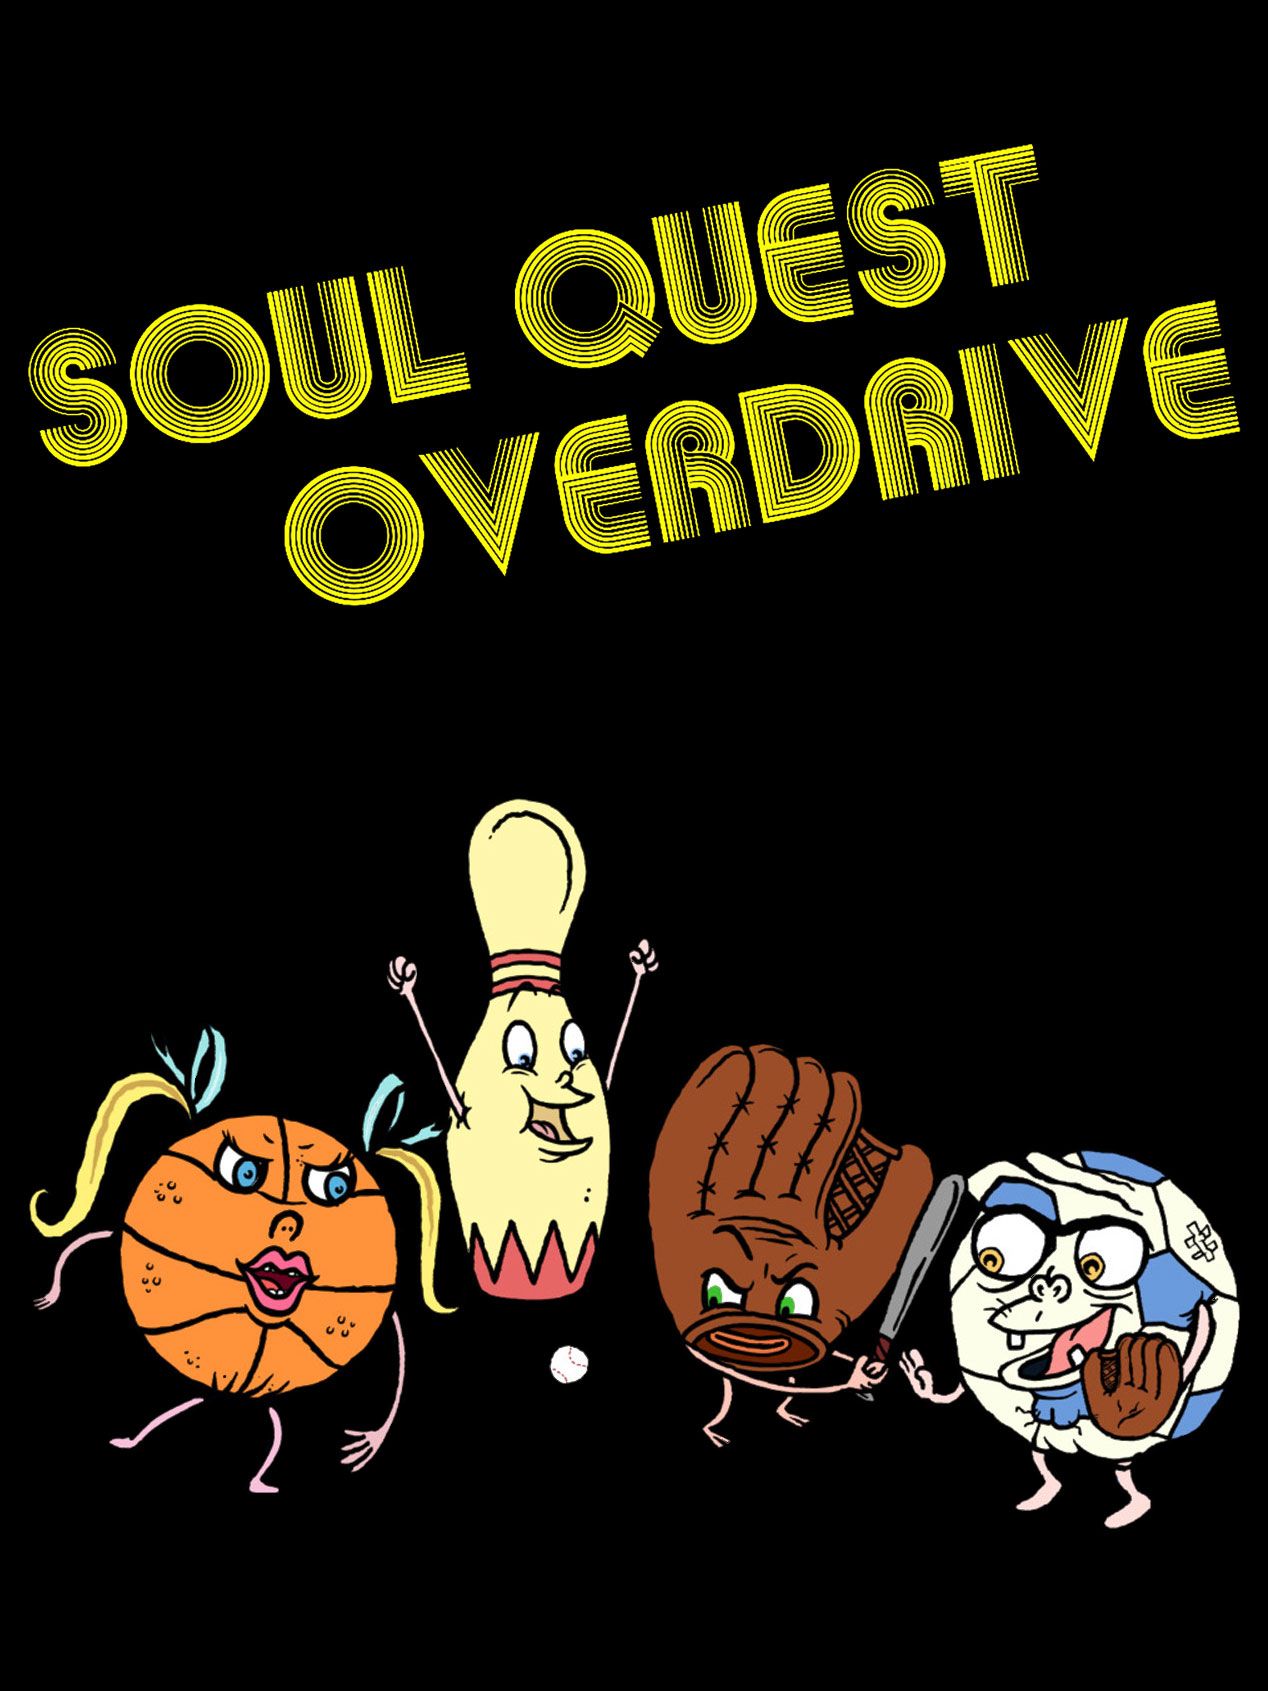 The Cast play together on the Soul Quest Overdrive Poster